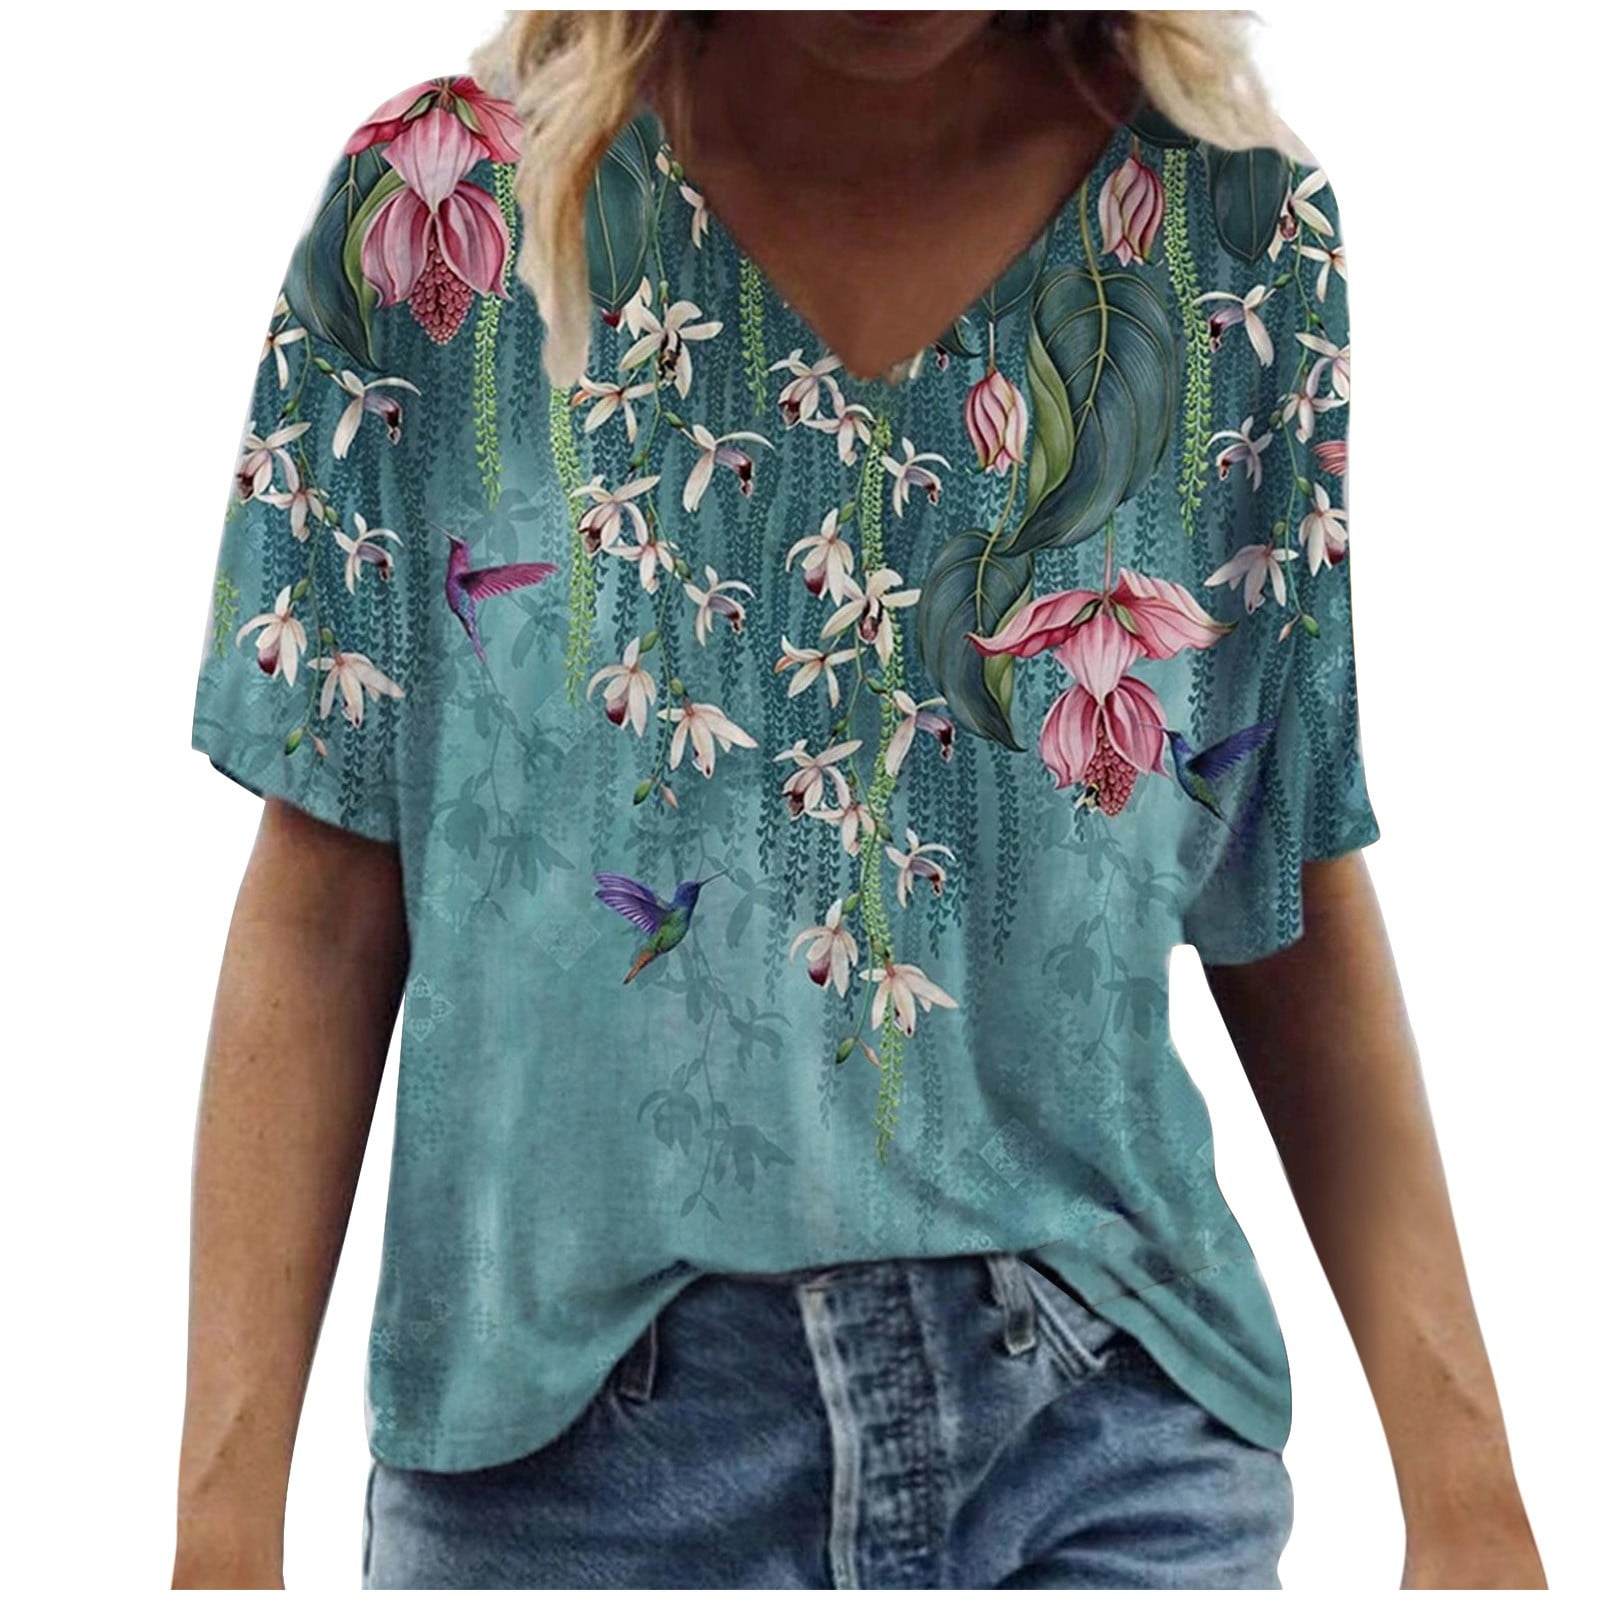 Bidobibo Womens Floral Print Summer Tops for Women Casual Loose Crew Neck T Shirts Short Sleeve Colorful Blouses